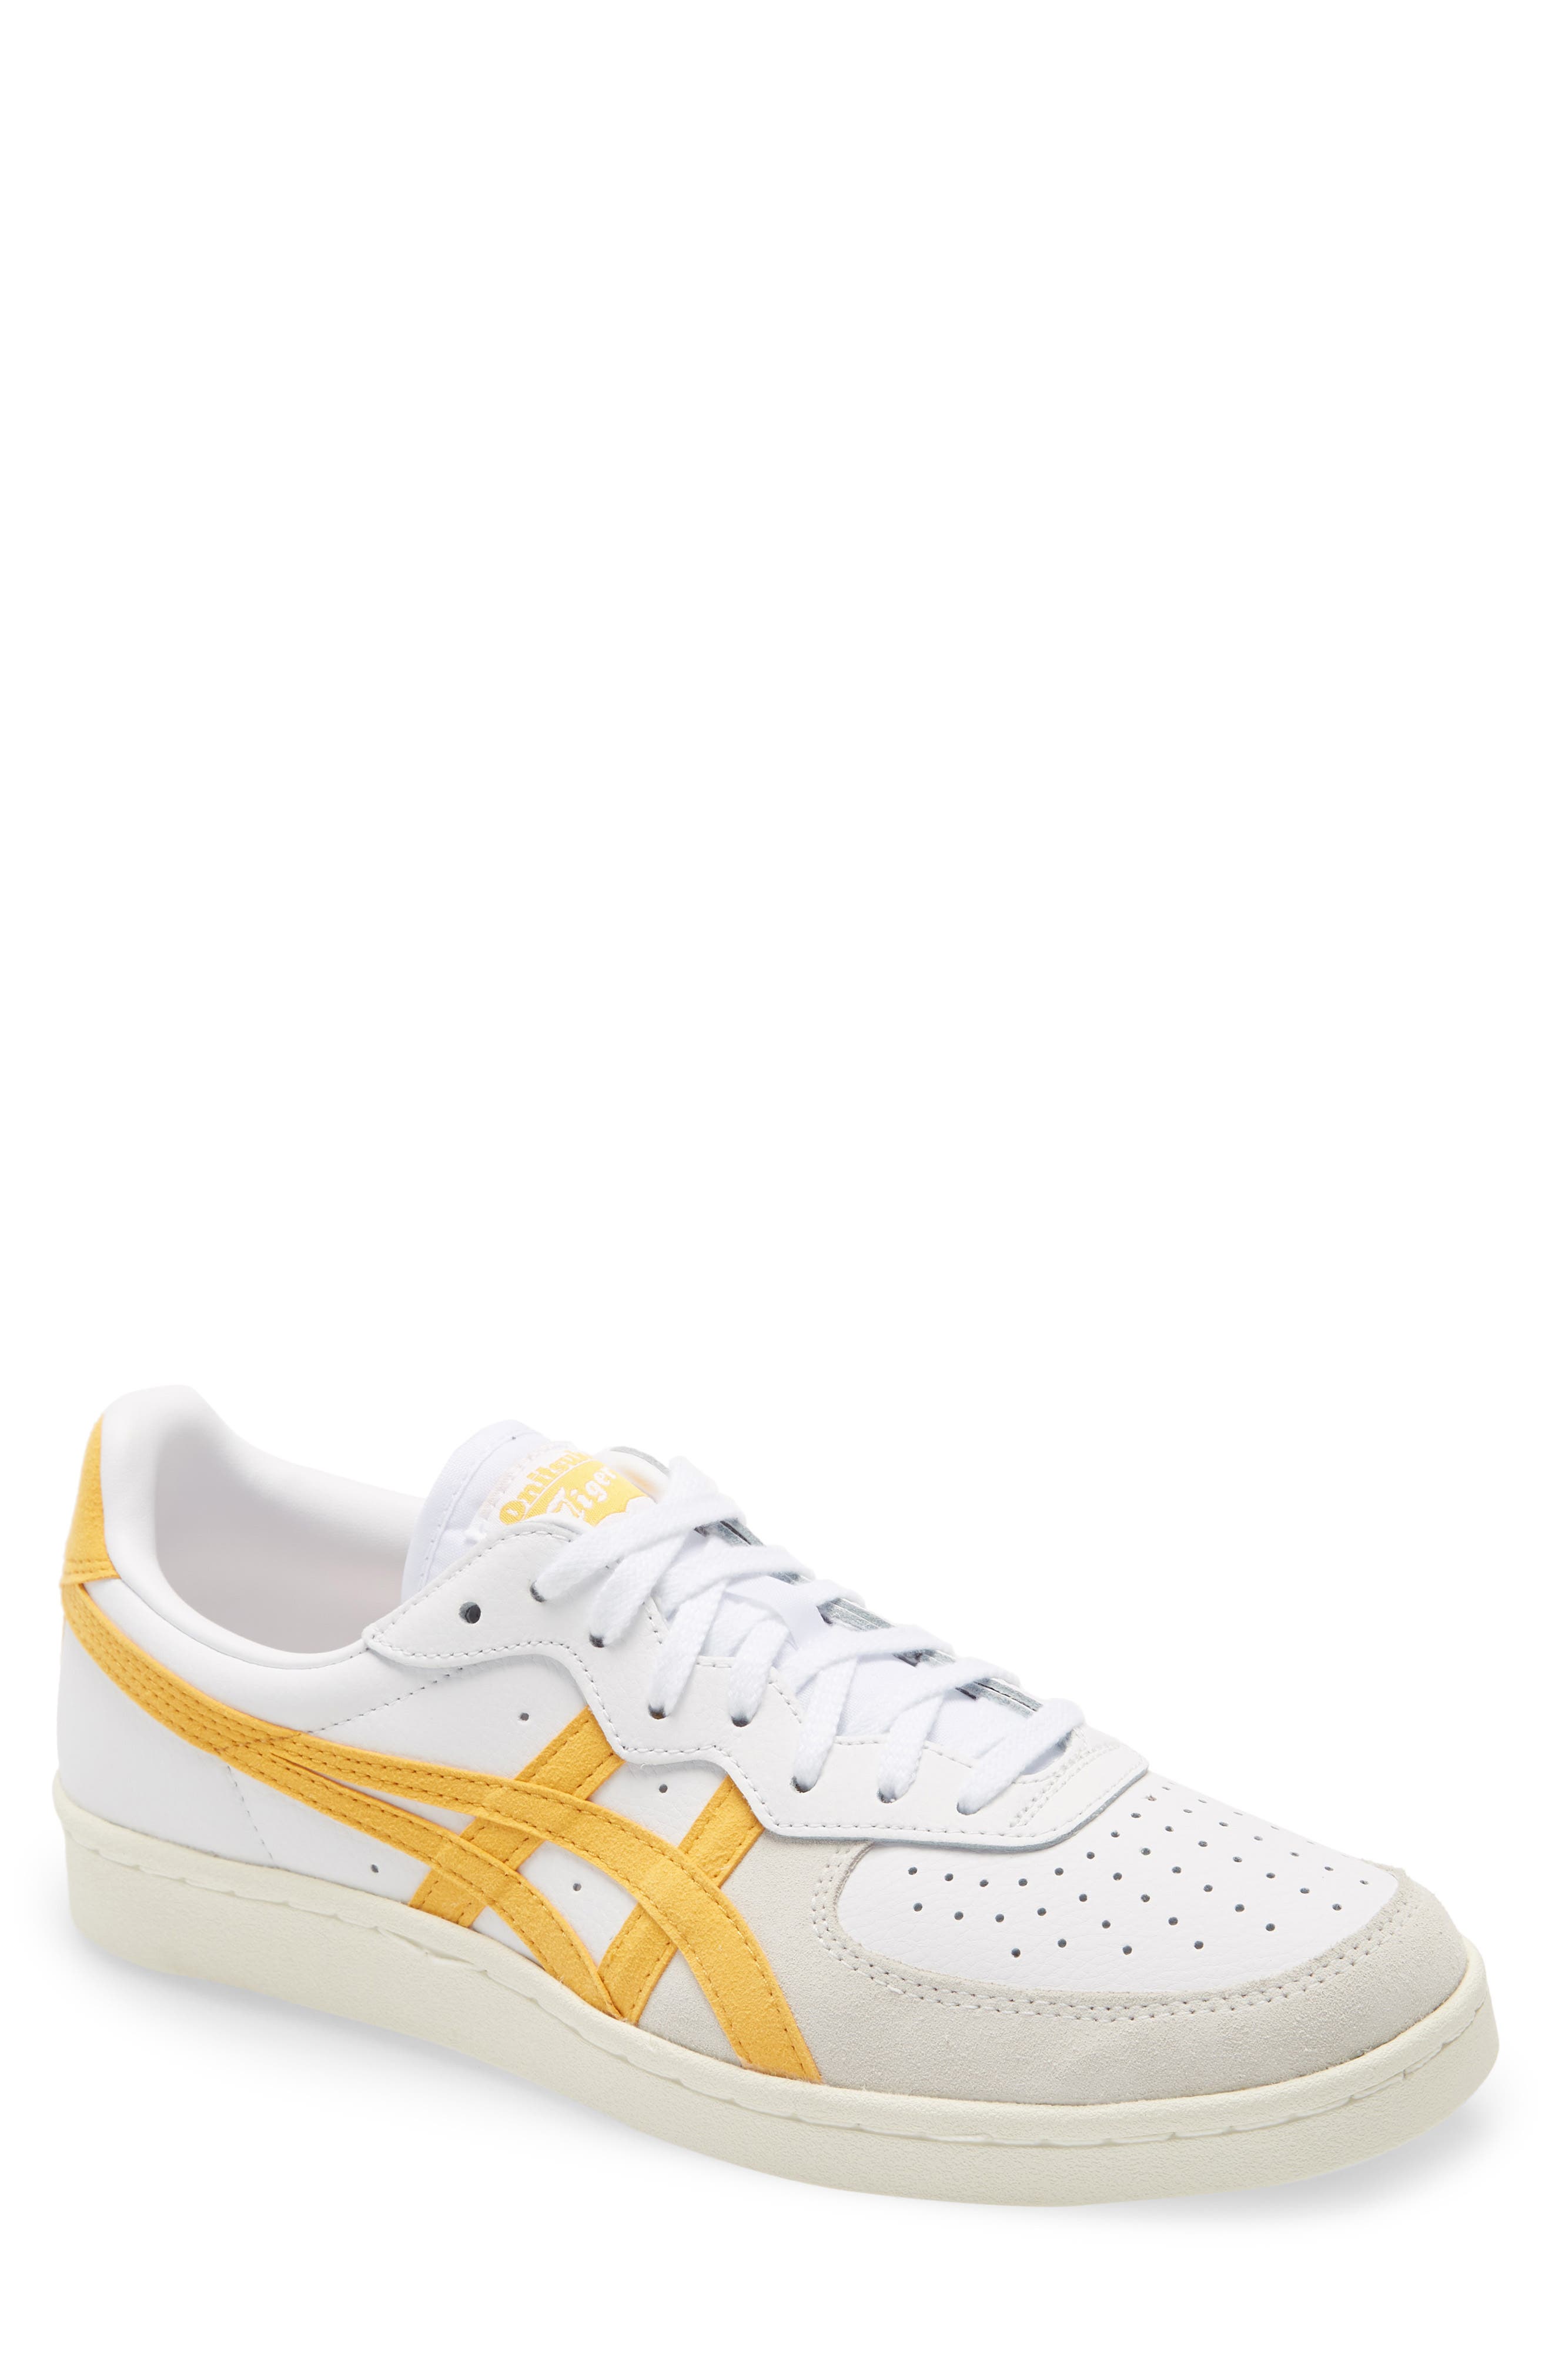 asics tiger clearance